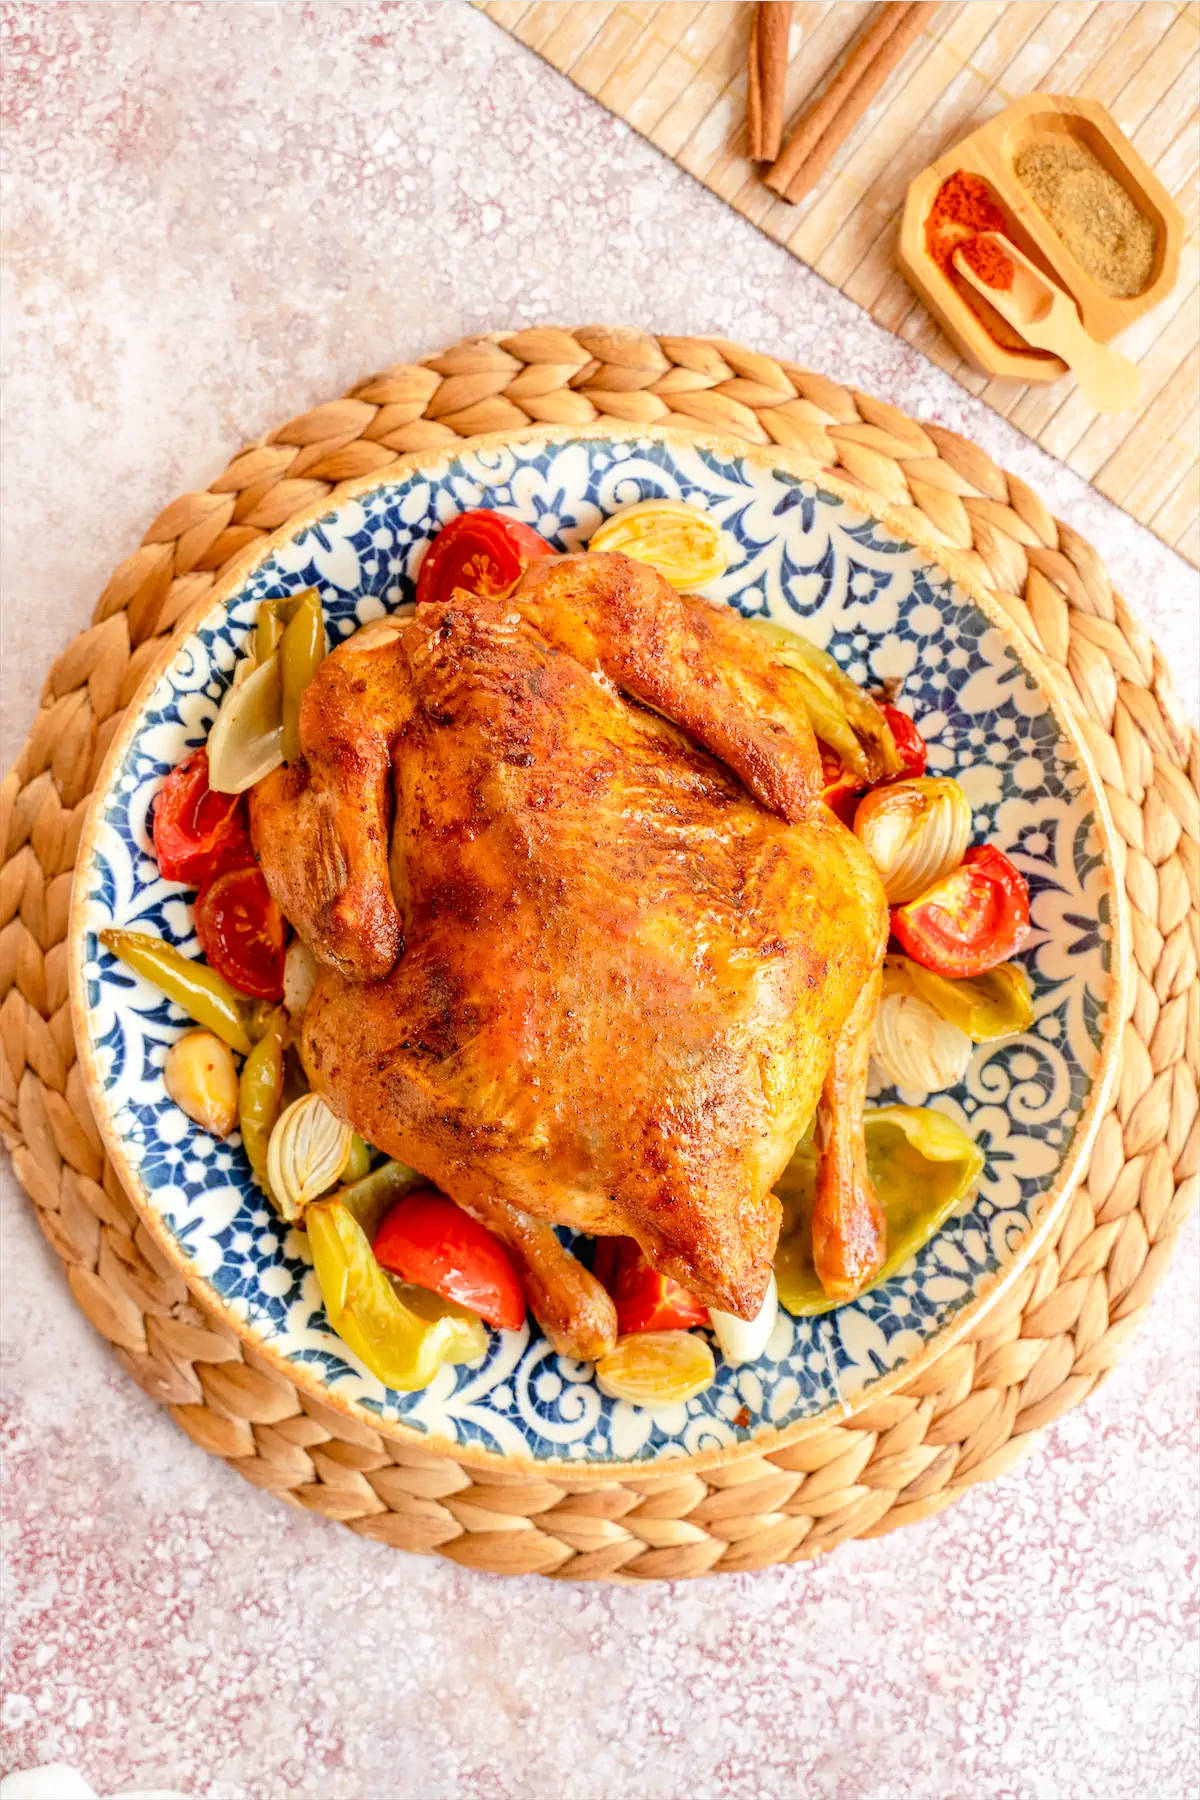 Roasted whole chicken with vegetables kept on a plate on kitchen table.